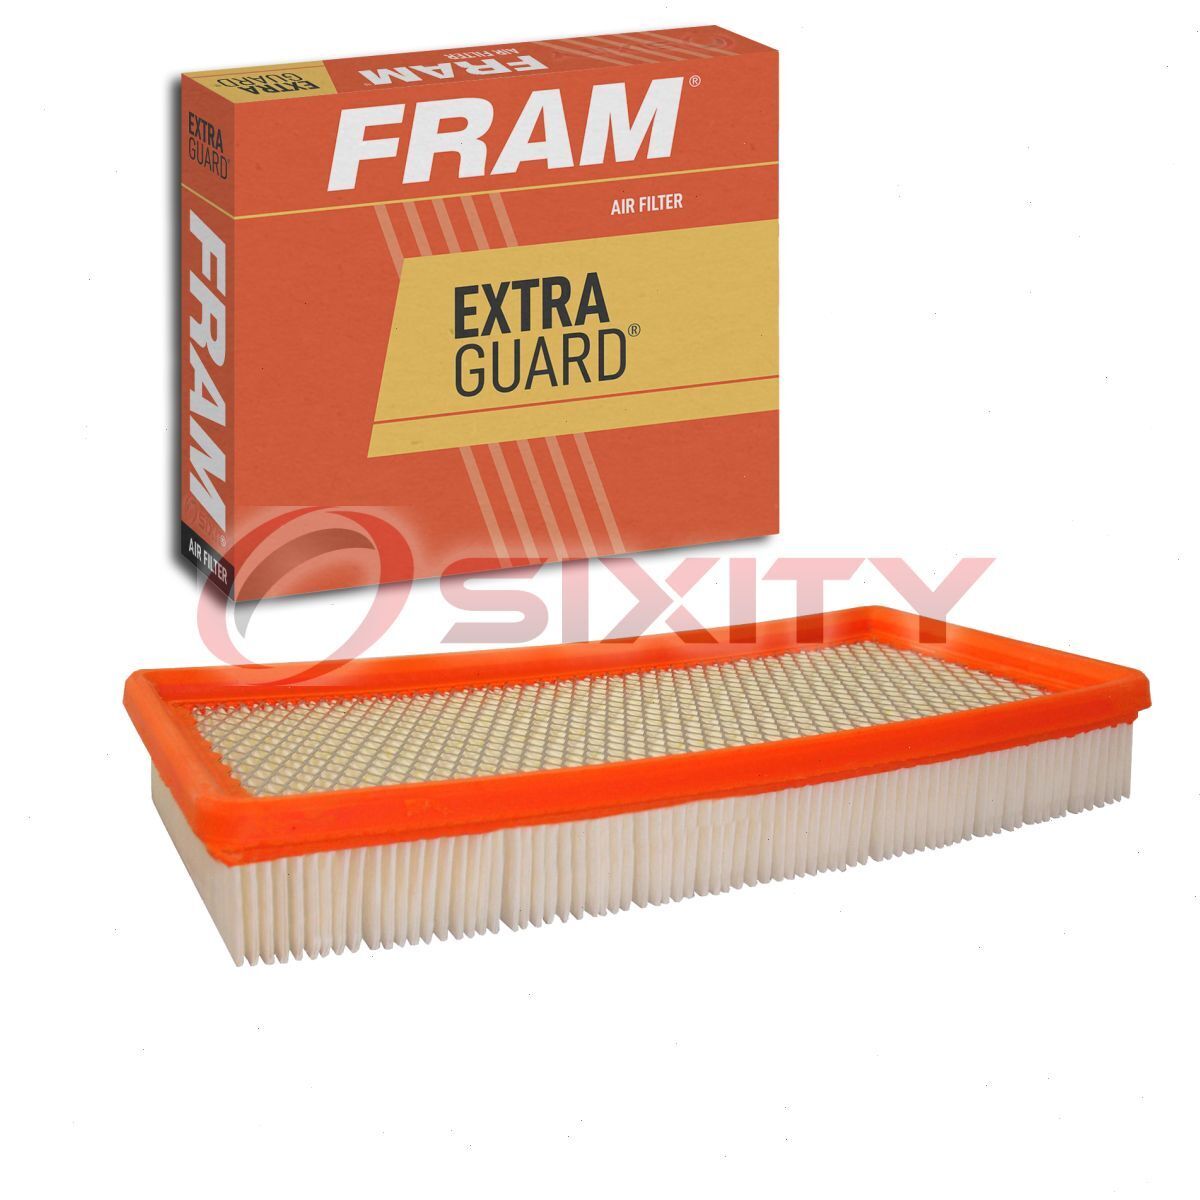 FRAM Extra Guard Air Filter for 1992-2005 Chevrolet Astro Intake Inlet zk